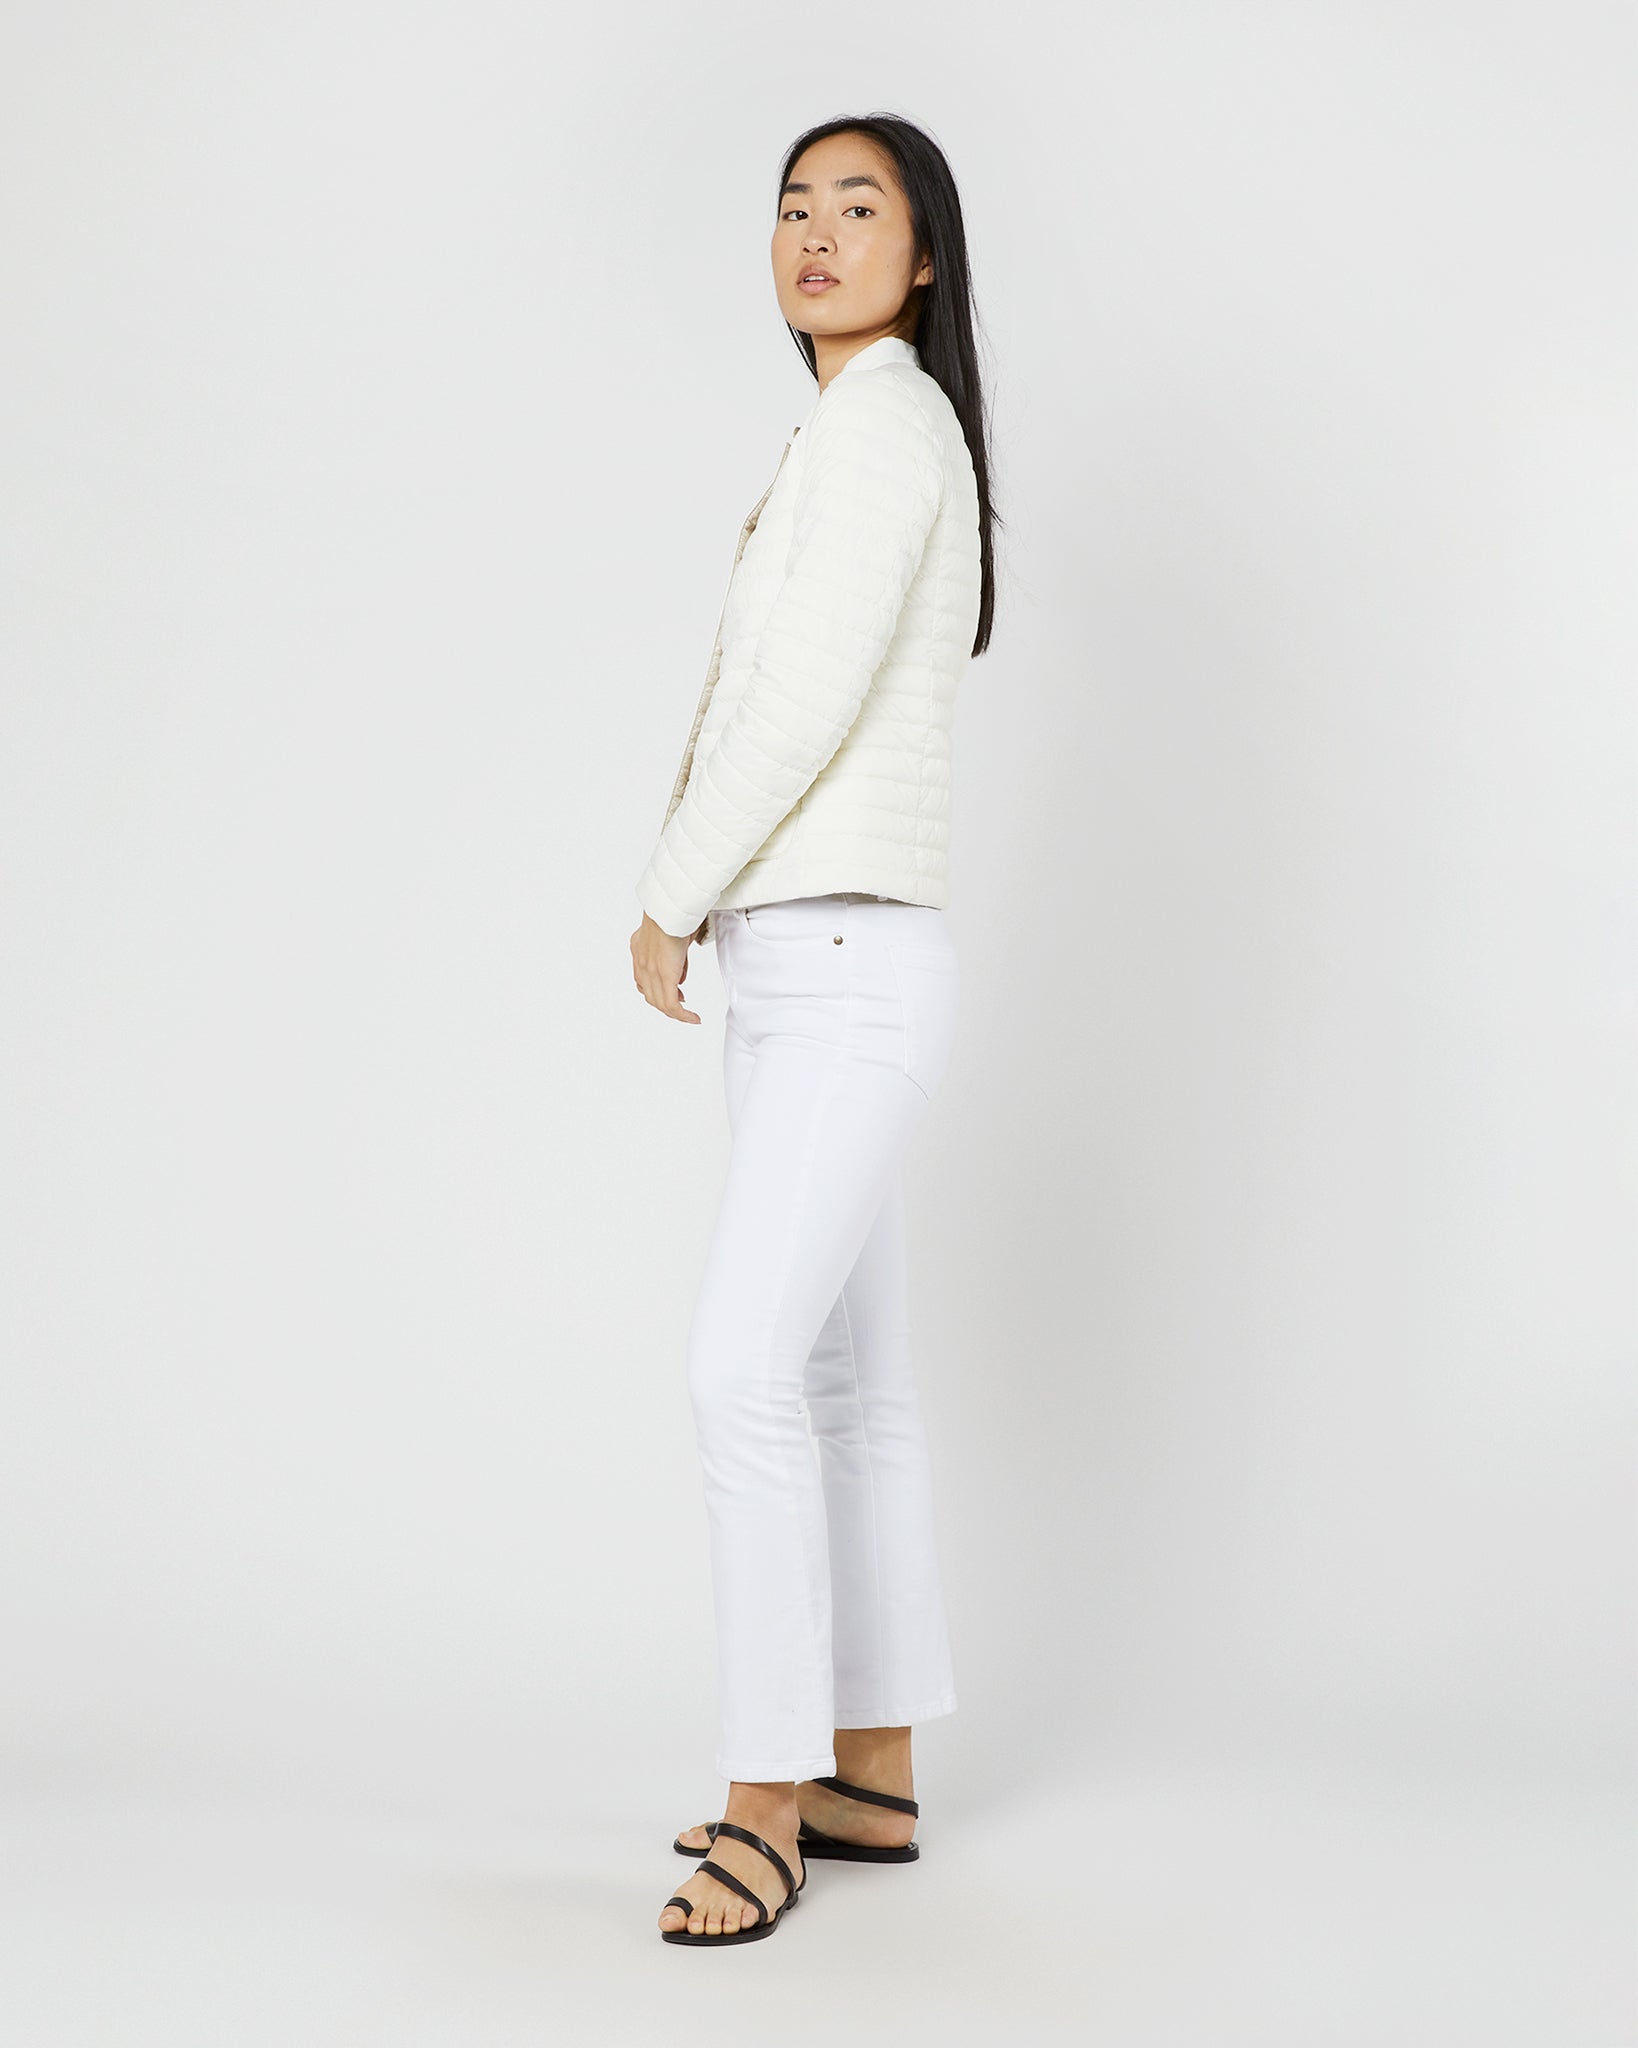 Reversible Short Jacket in White/Champagne